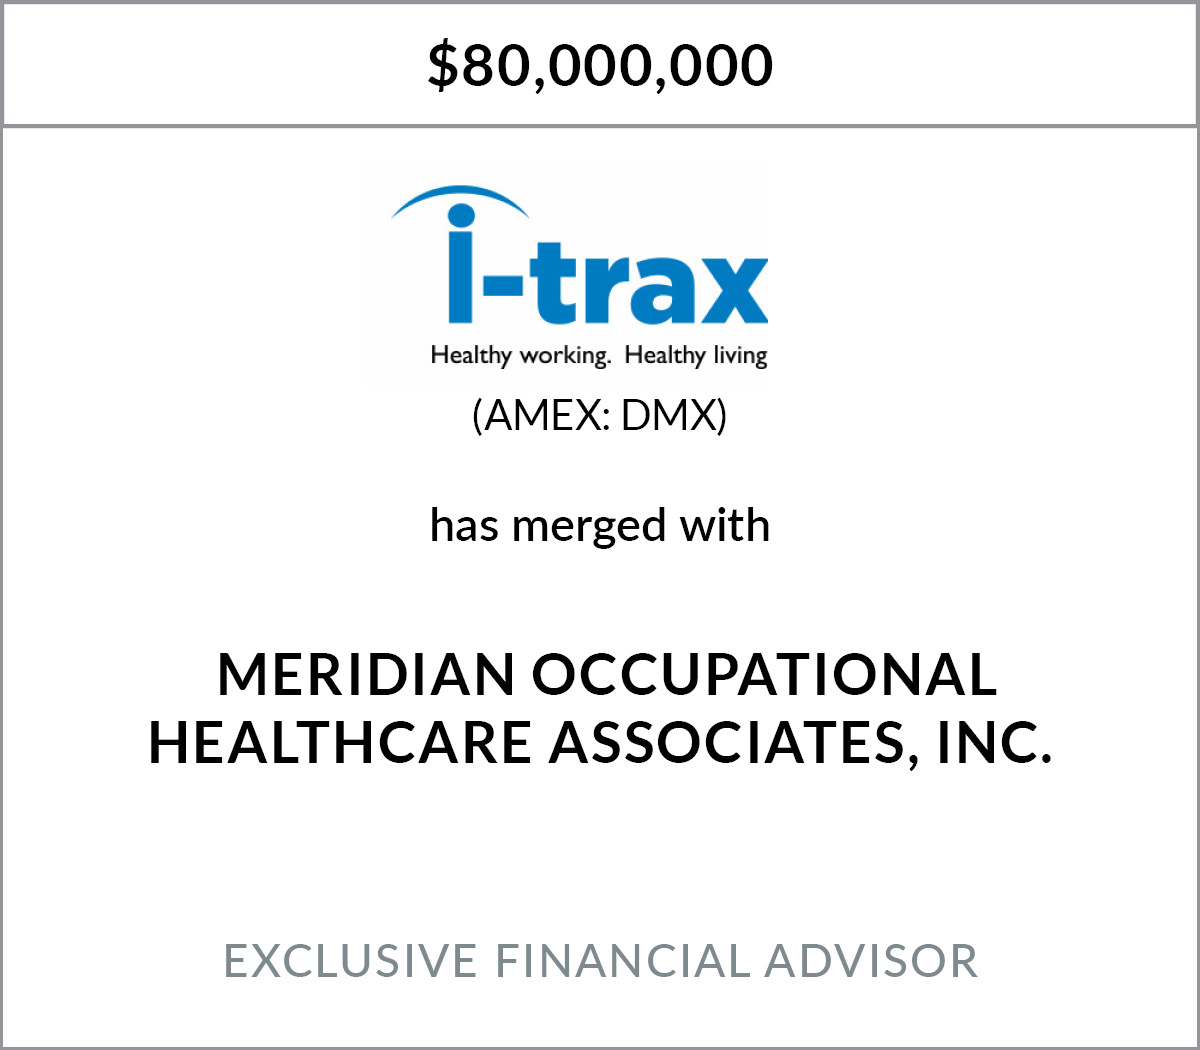 i-Trax Merges with Meridian Occupational Healthcare Associates, Inc.